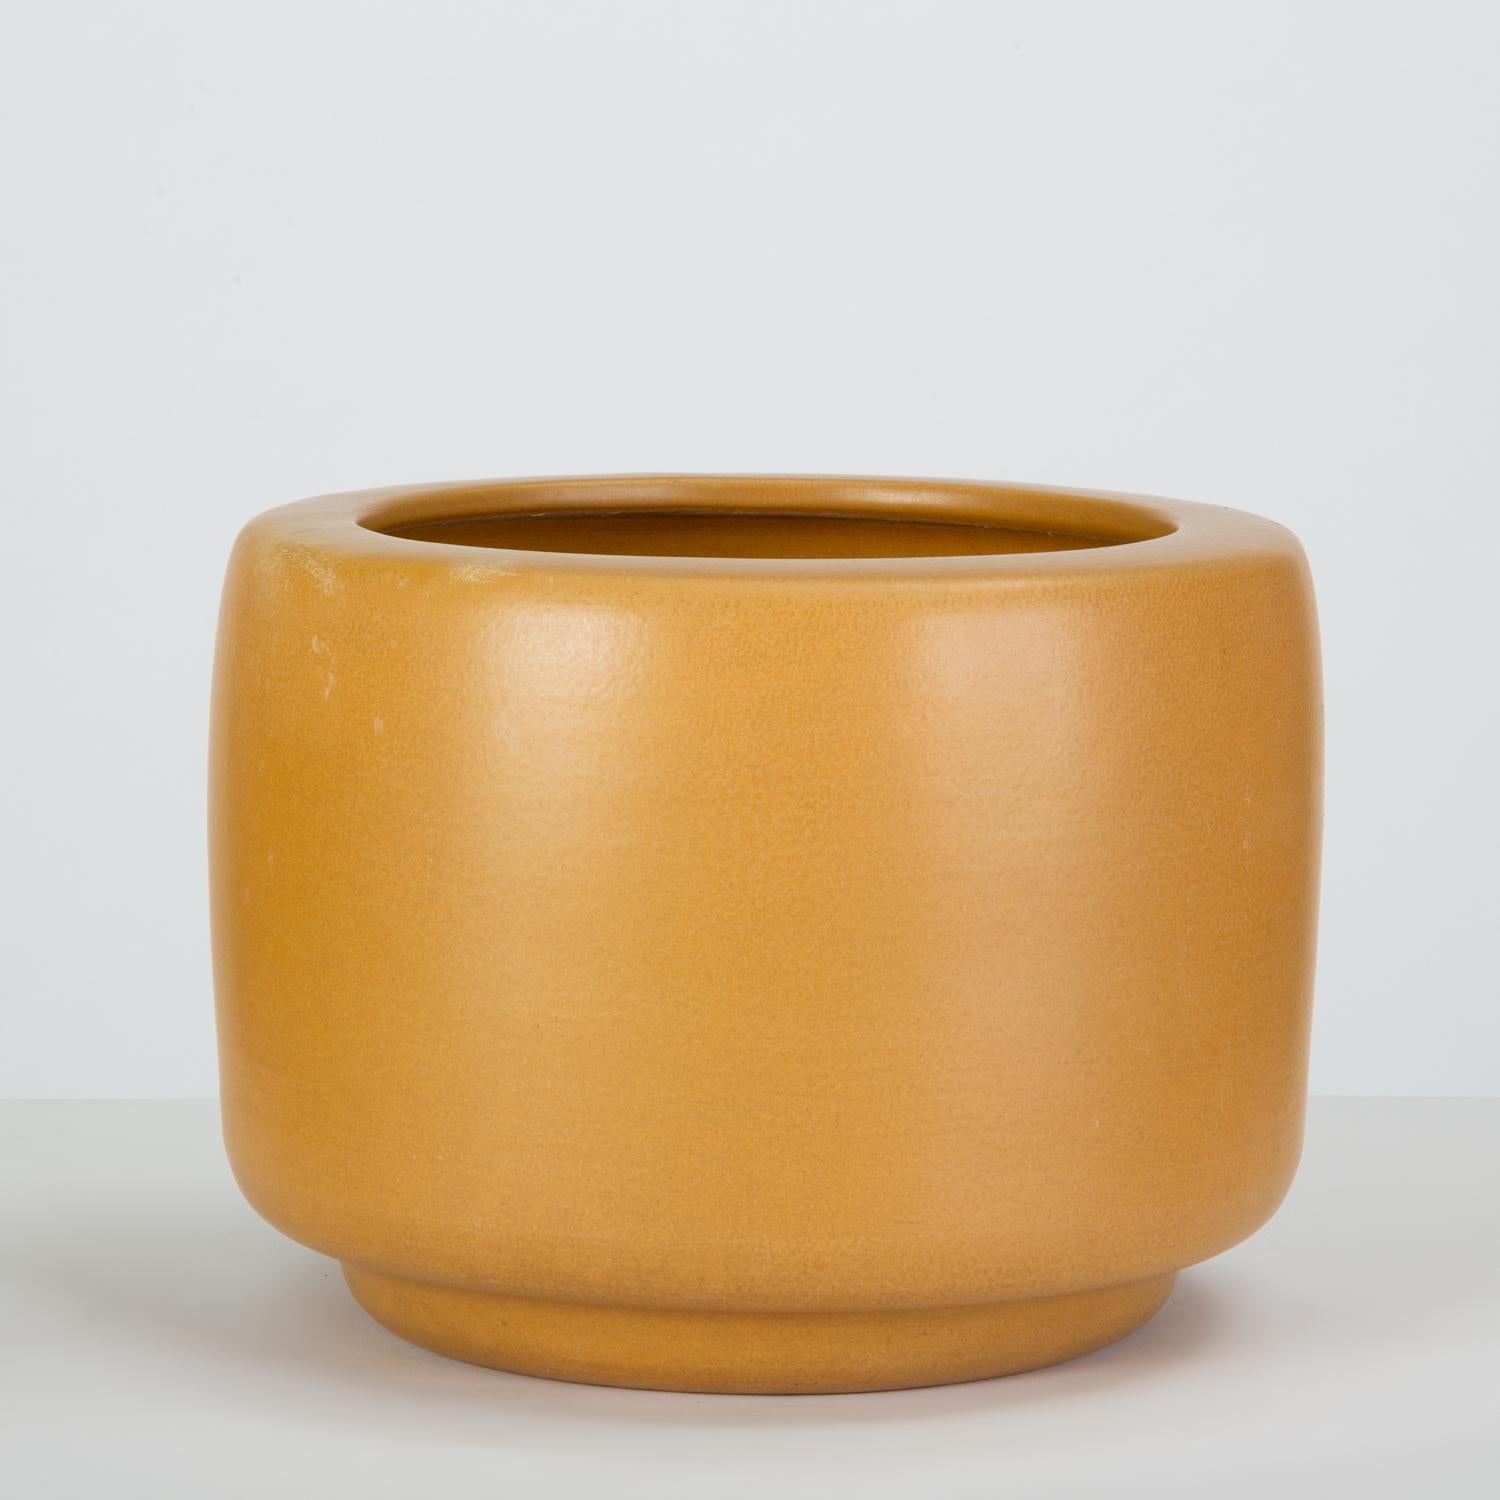 American CP-13 Tire Planter by John Follis for Architectural Pottery in Yellow Glaze